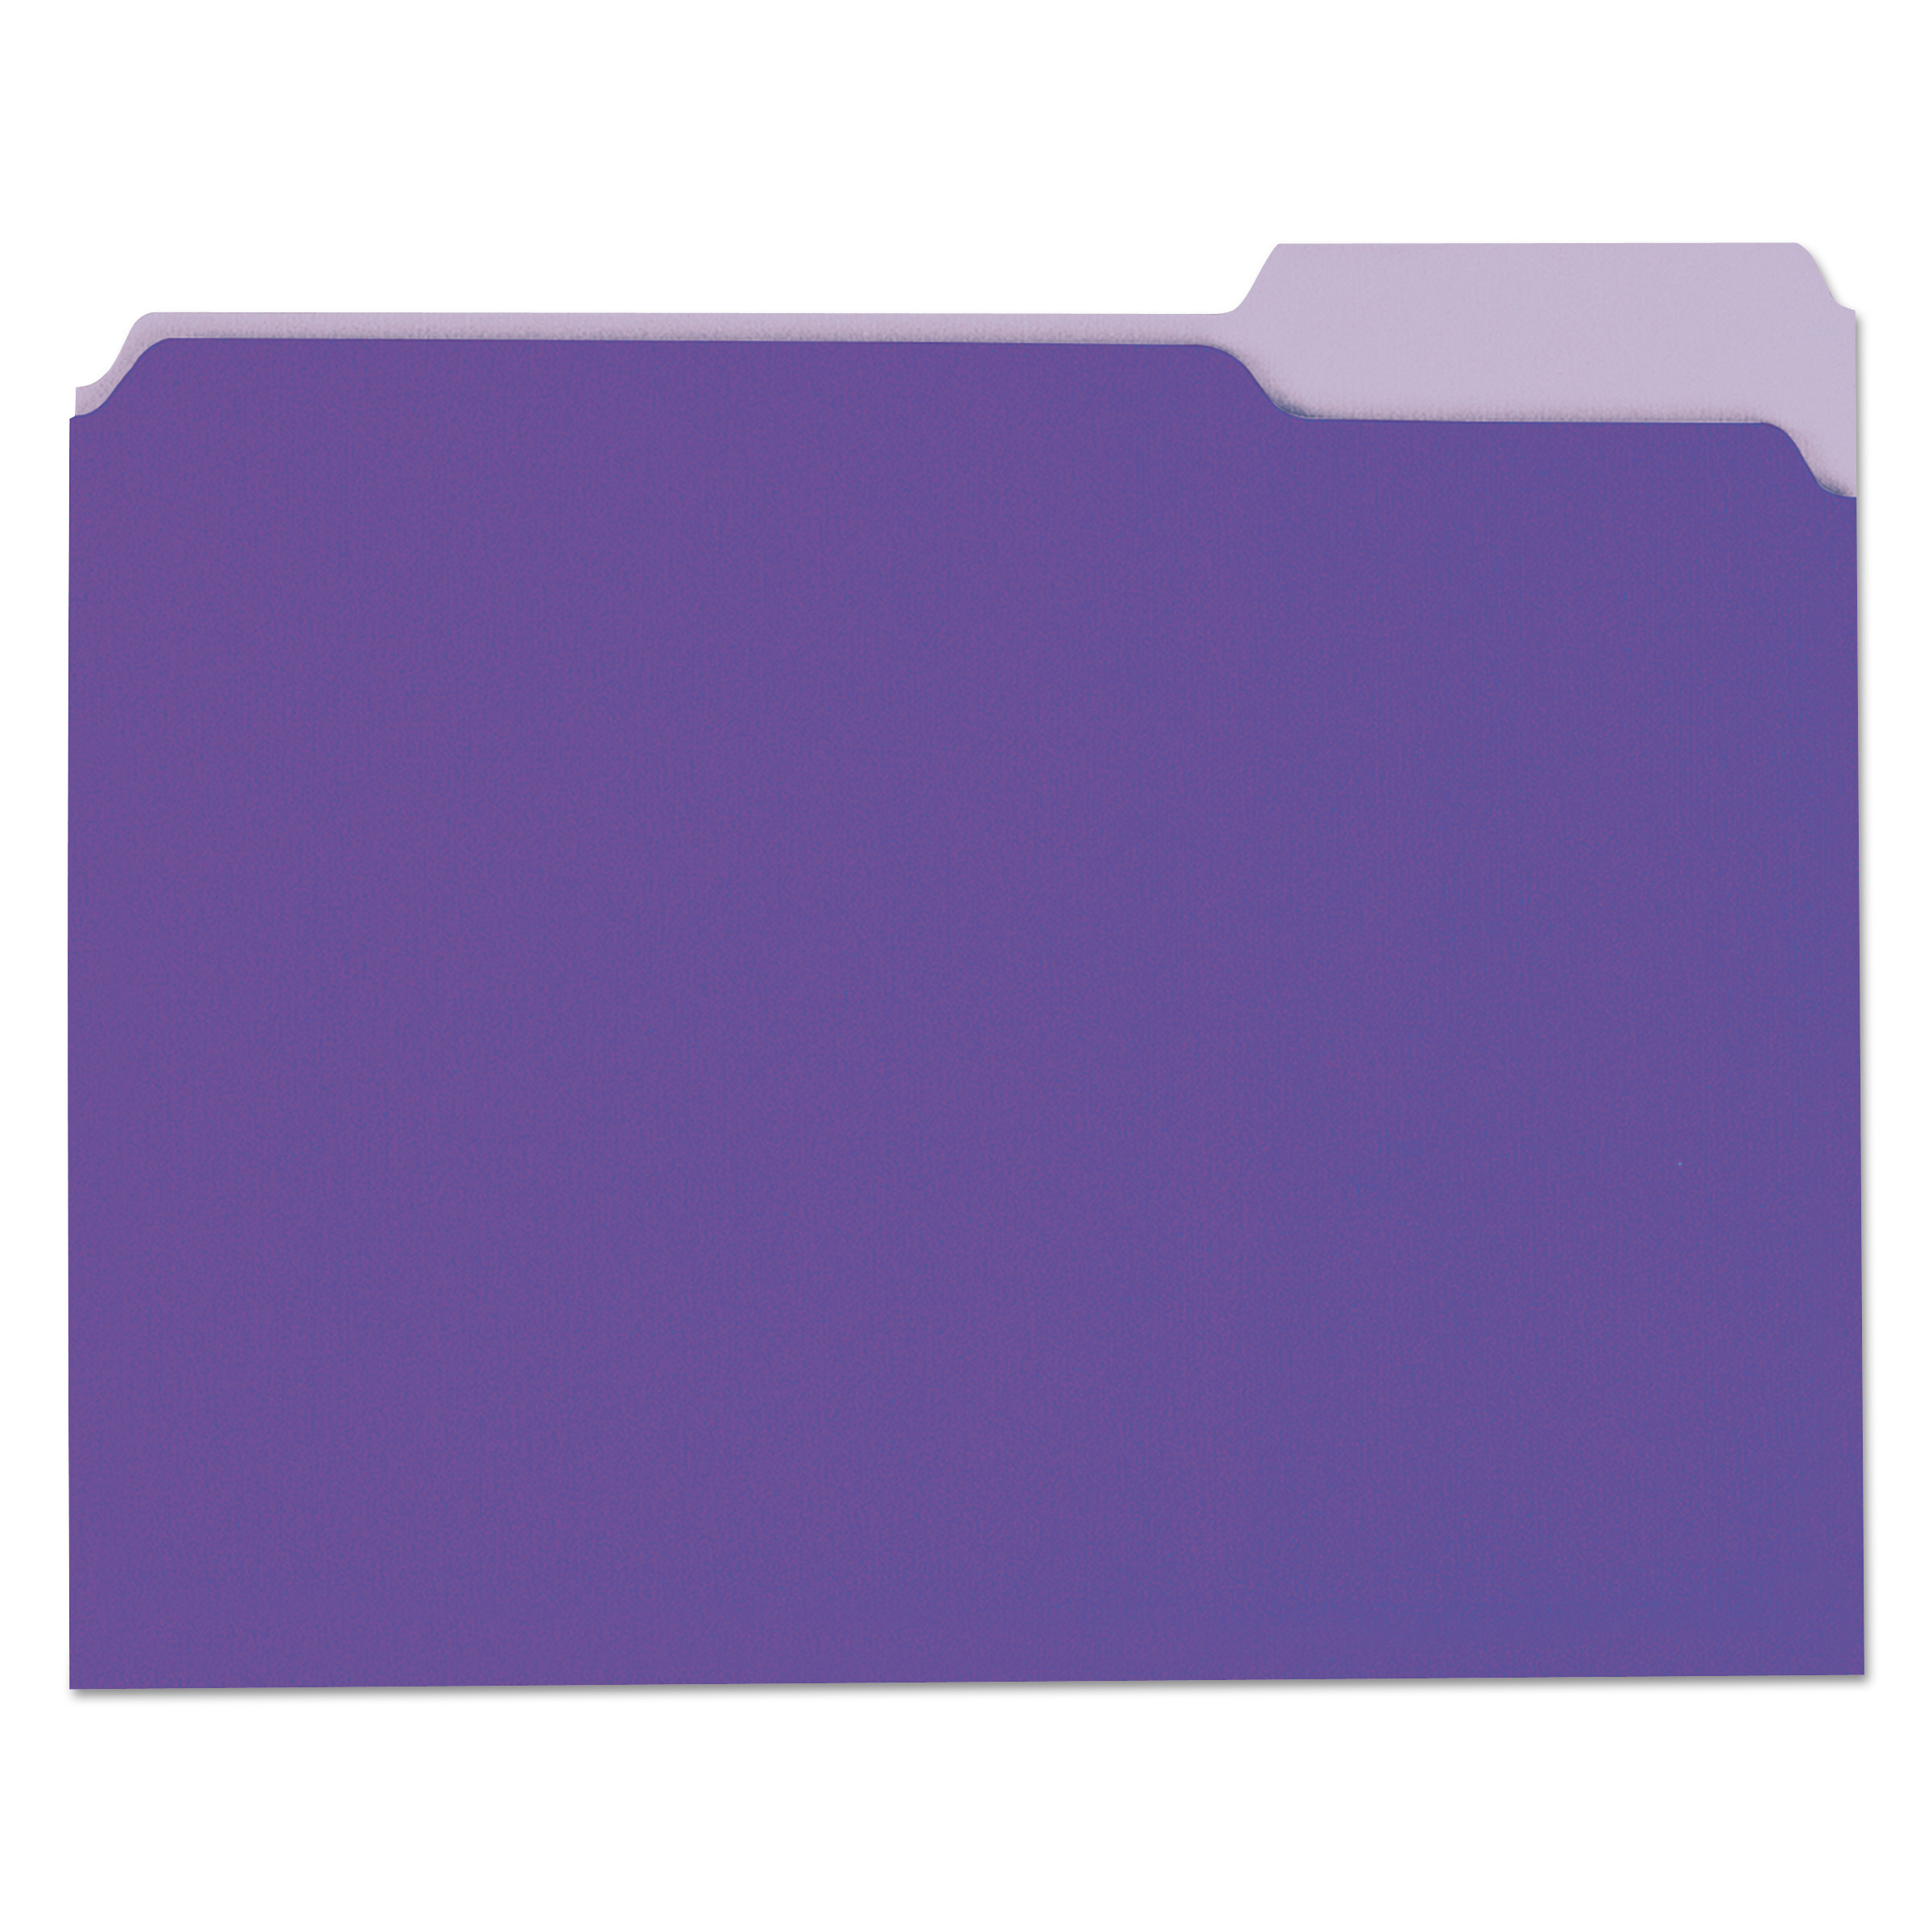  Universal UNV10505 Deluxe Colored Top Tab File Folders, 1/3-Cut Tabs, Letter Size, Violet/Light Violet, 100/Box (UNV10505) 